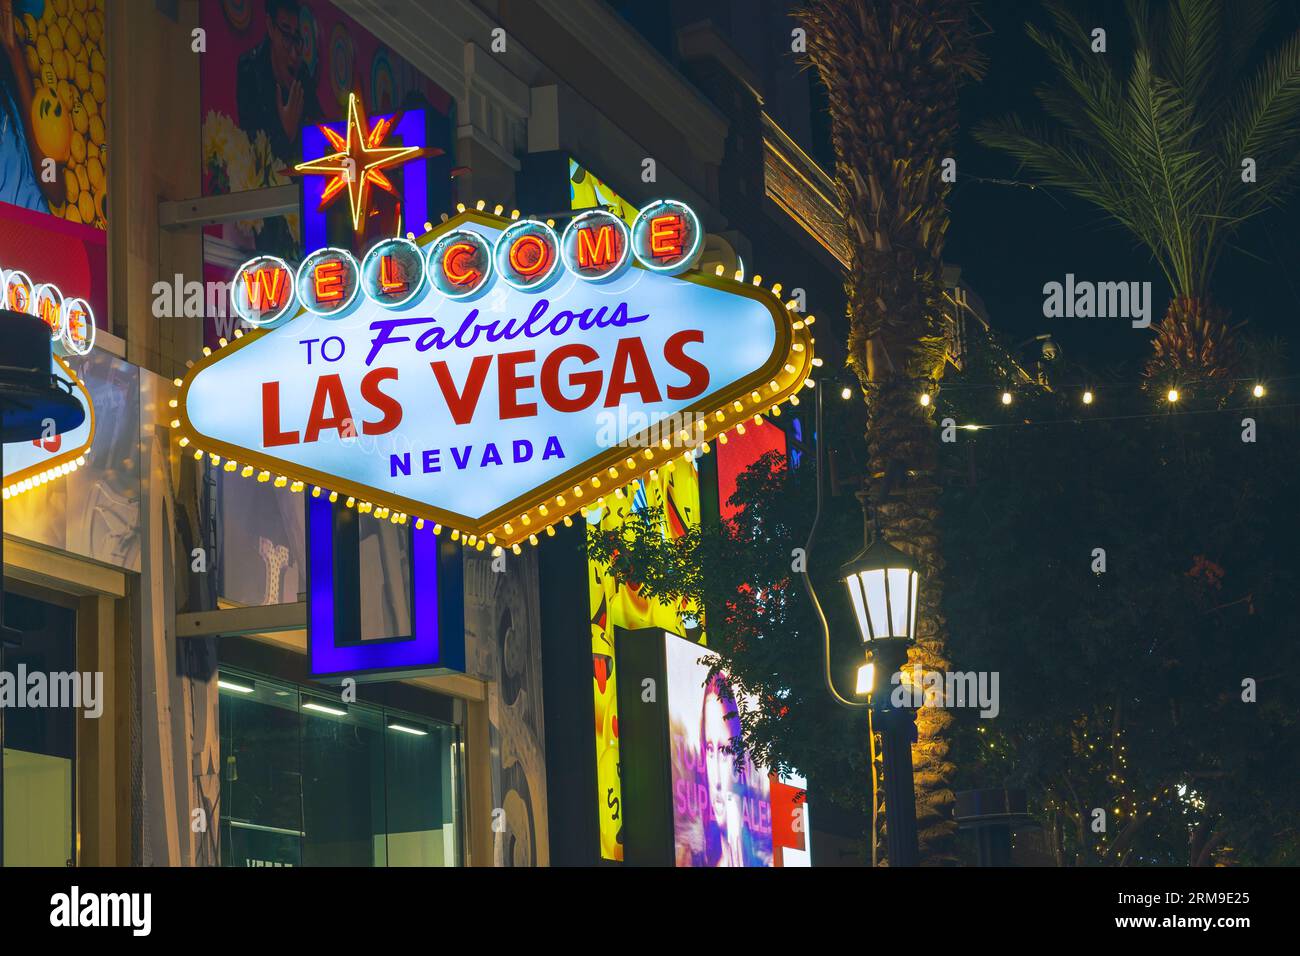 Capture the vibrant spirit of Las Vegas with this image showcasing the famous “Welcome to Las Vegas” sign located outside the Welcome To Las Vegas sto Stock Photo